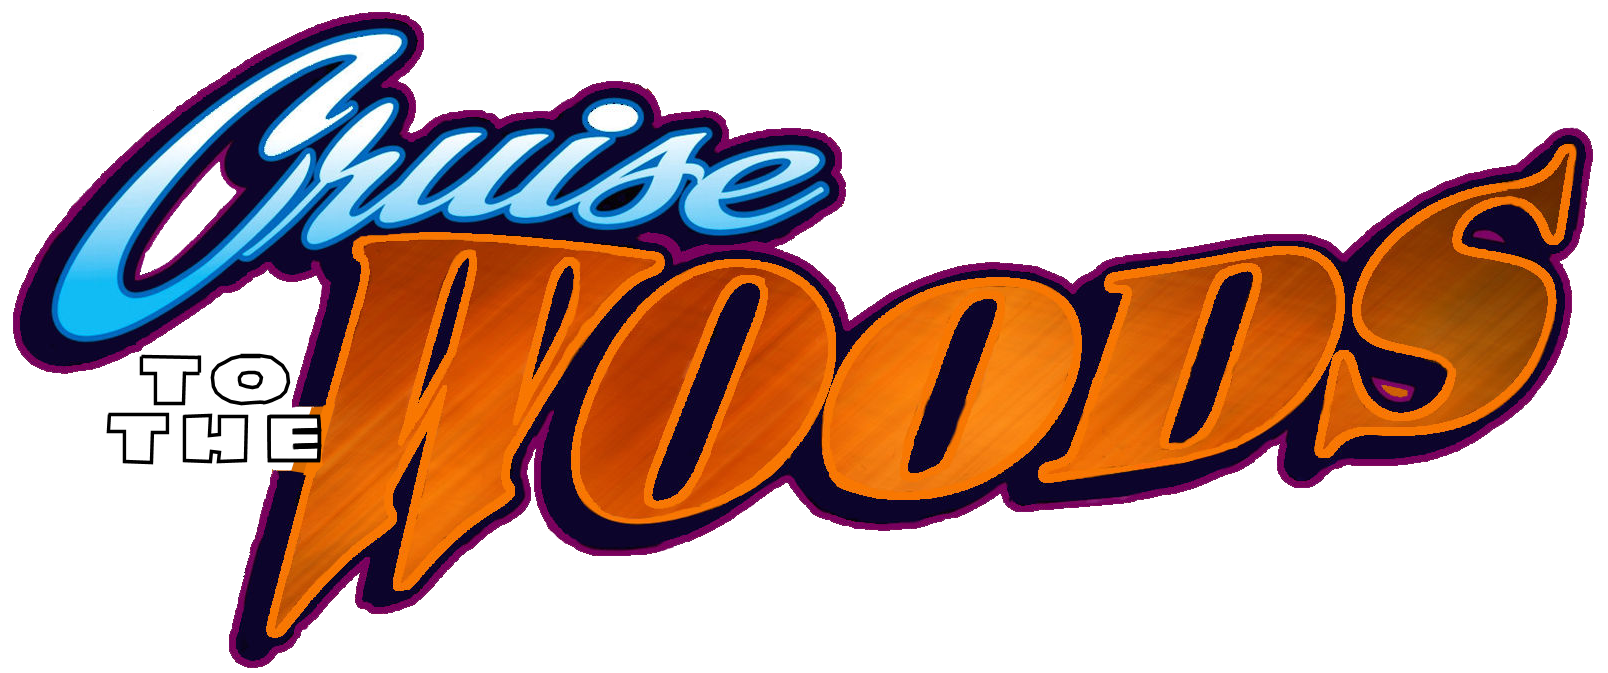 WC Cruise to the Woods Logo